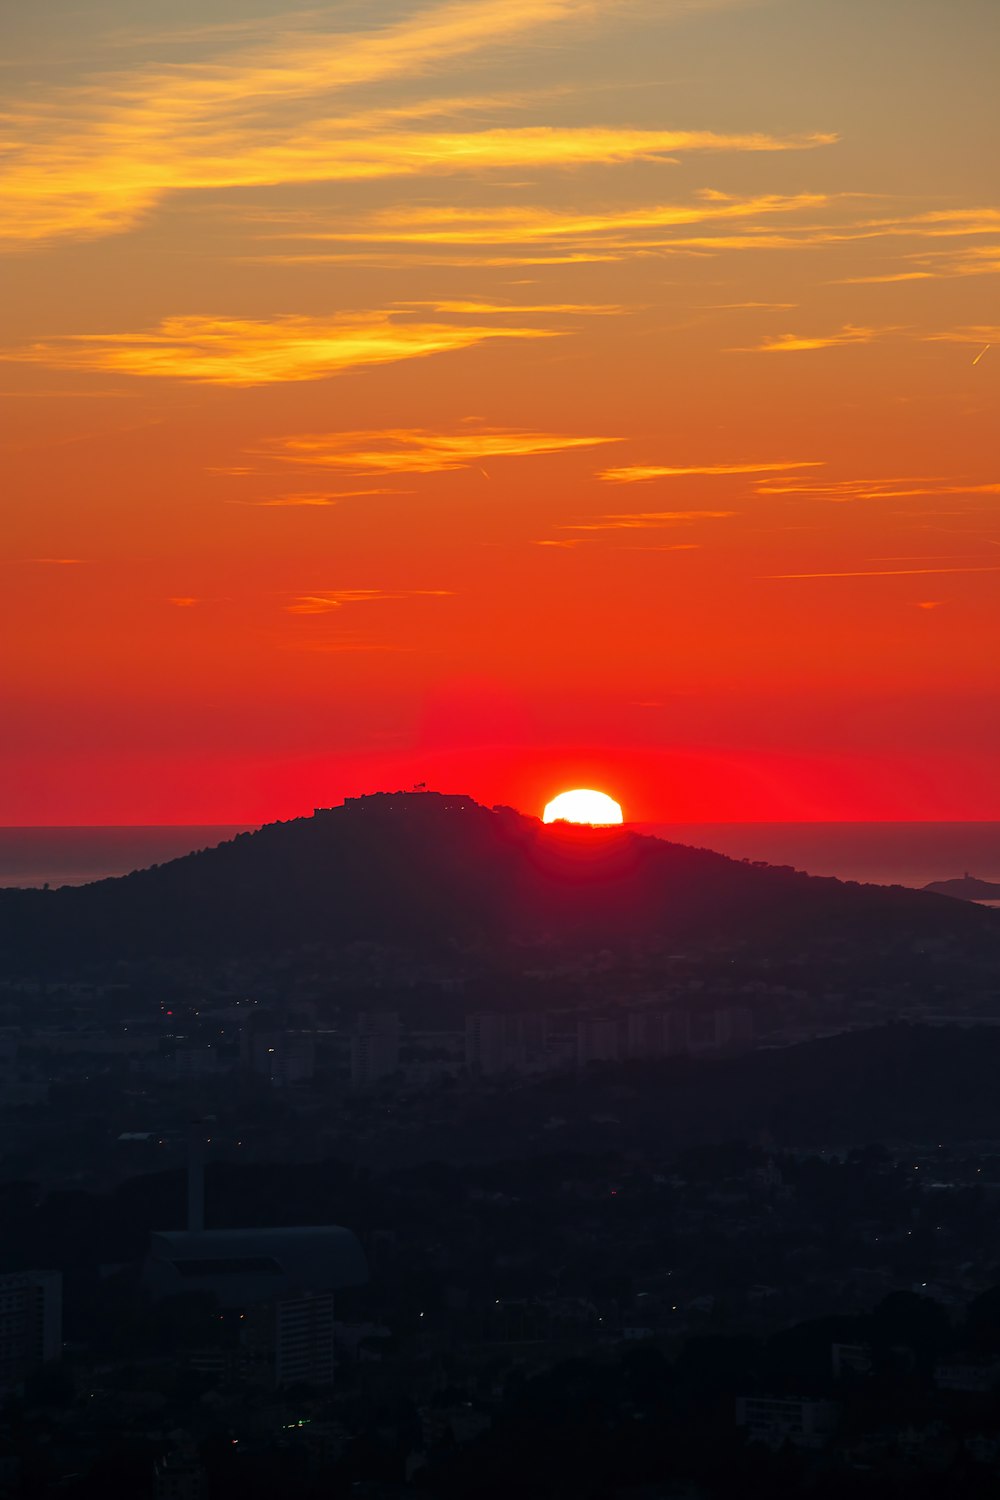 the sun is setting over a city with a mountain in the background